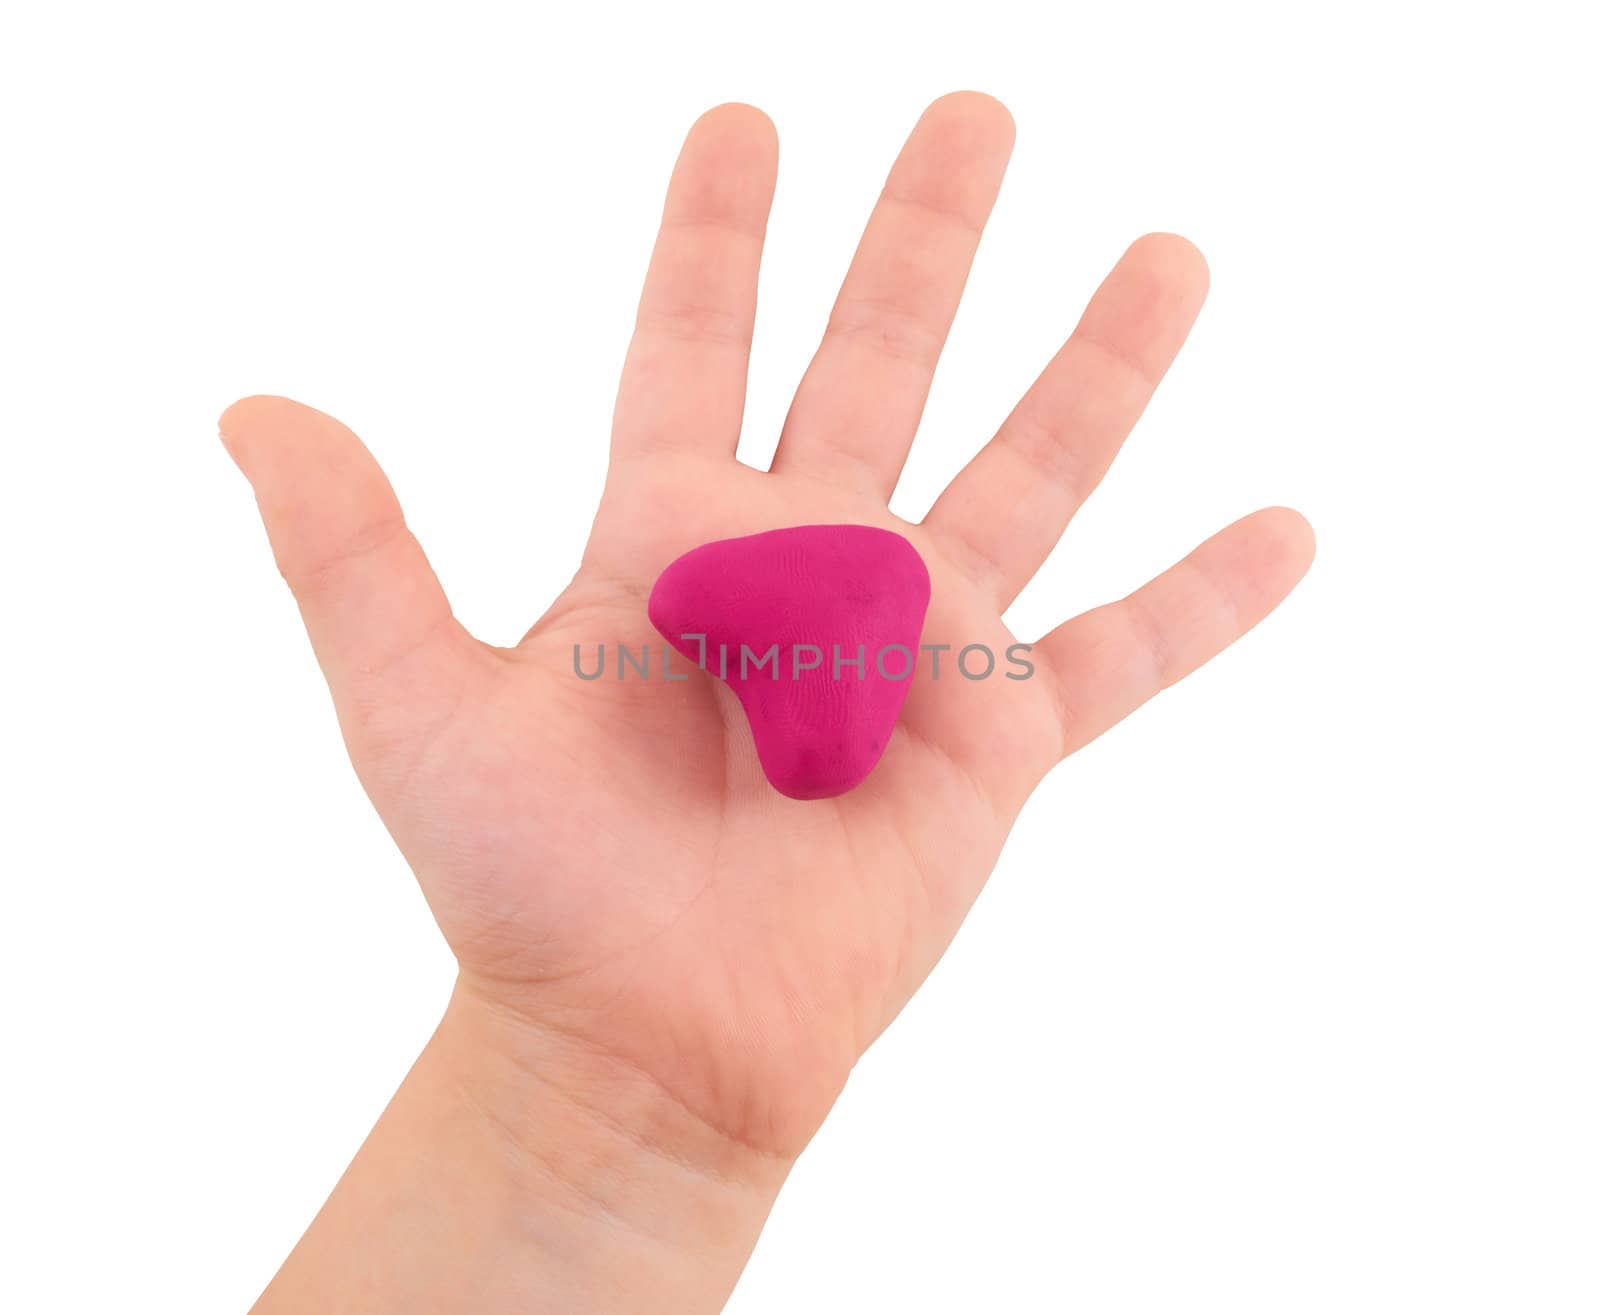 A small child's hand holding a heart-shaped figure on an isolated white background